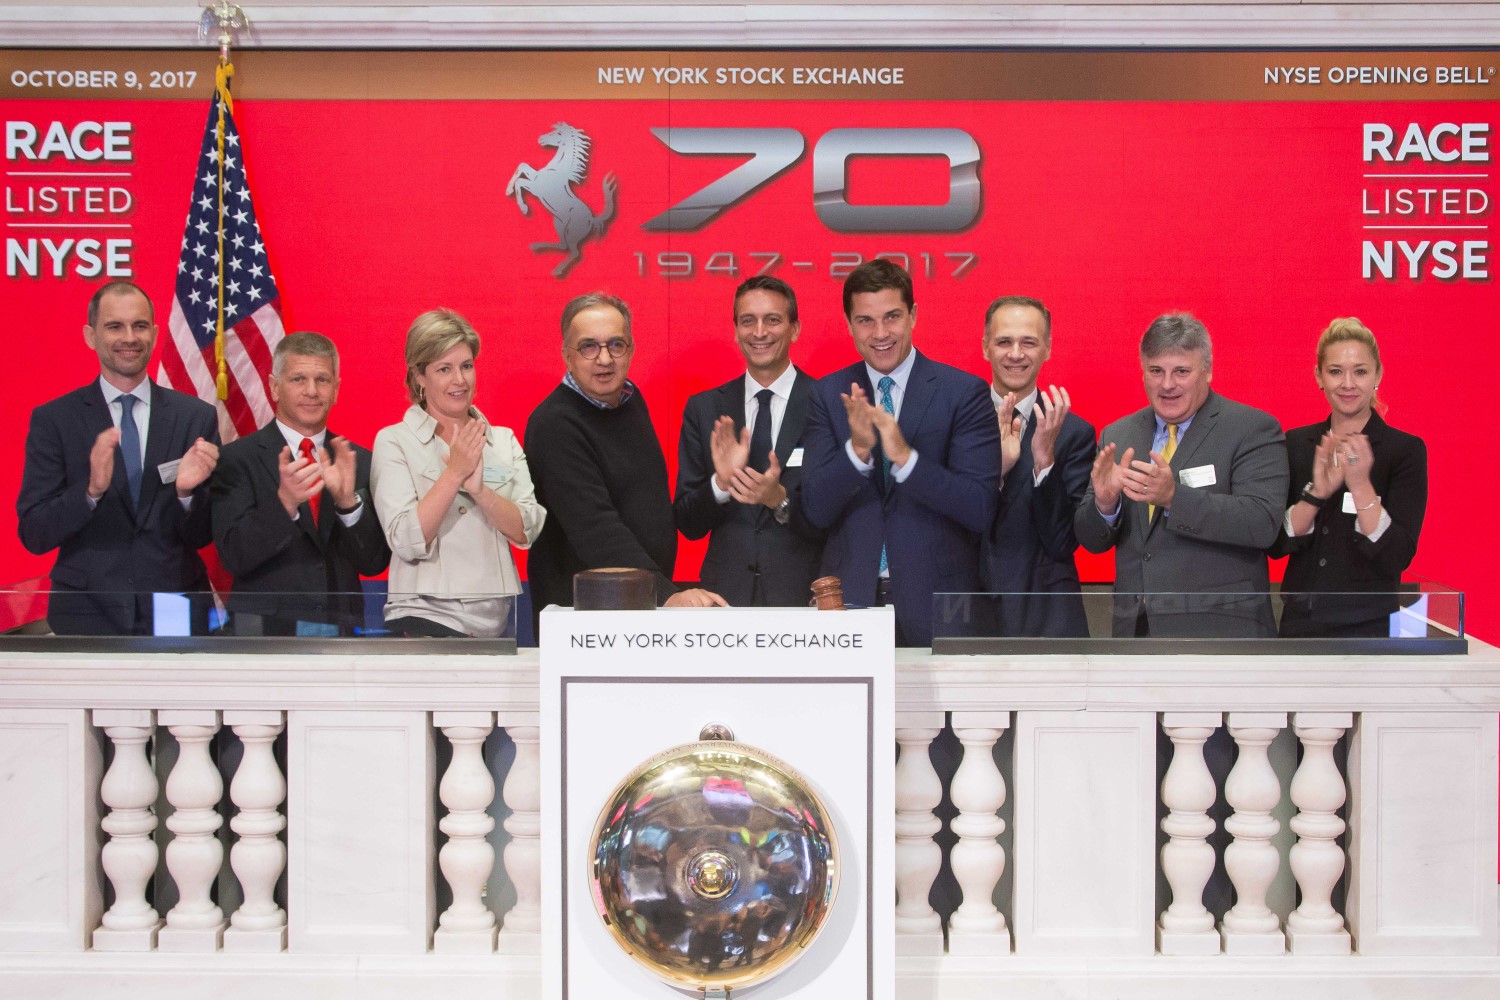 Sergio Marchionne openned the NYSE Monday